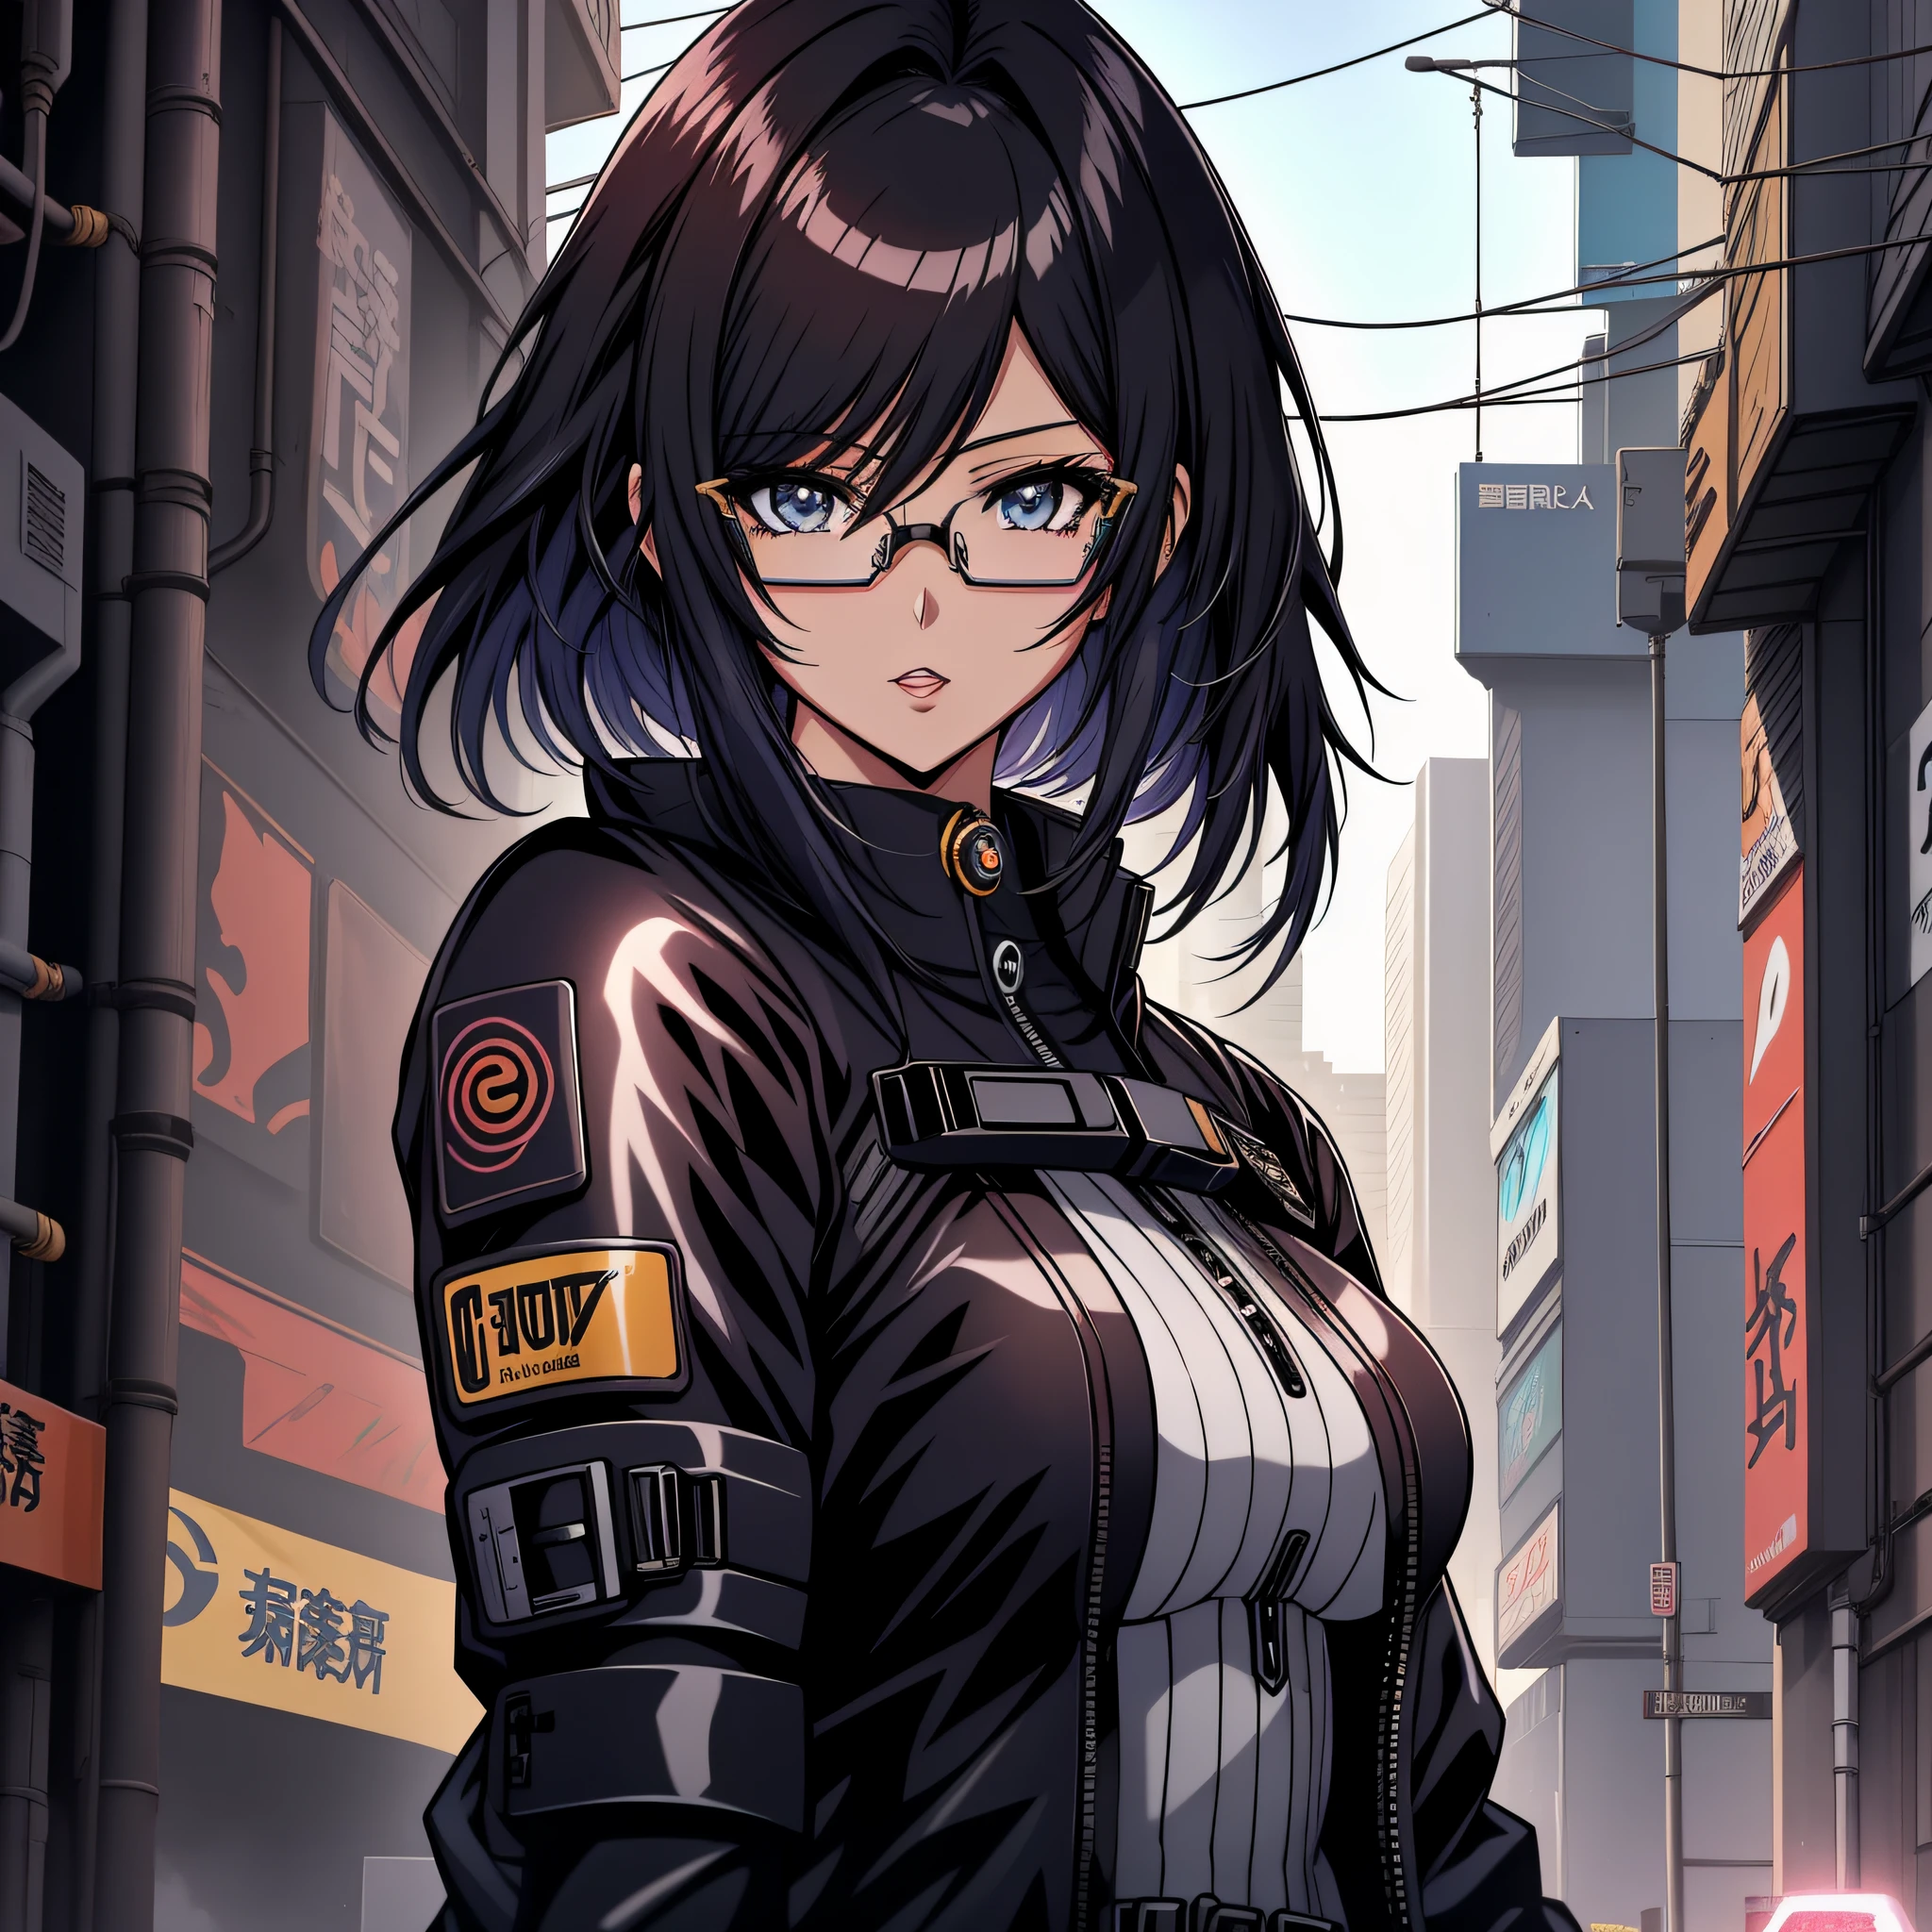 Anime - imagem de estilo 1mulher com olhos azuis e Bblack hair, Bblack hair, thick eyebrow, face of a 27 year old woman, 27 year old young man, cloused mouth, cyberpunk anime art, (cloused mouth: 1.5), (double eyelid), (Bblack hair: 1.3) wearing dress, digital cyberpunk anime art, cyberpunk anime art, range murata and artgerm, eyeglass, futuristic clothing, wearing dress, stylish dress, Technological dress, transparent spectacle lenses, 极其详细的Artgerm, modern cyberpunk anime, artgerm and atey ghailan, artgerm and genzoman, cloused mouth